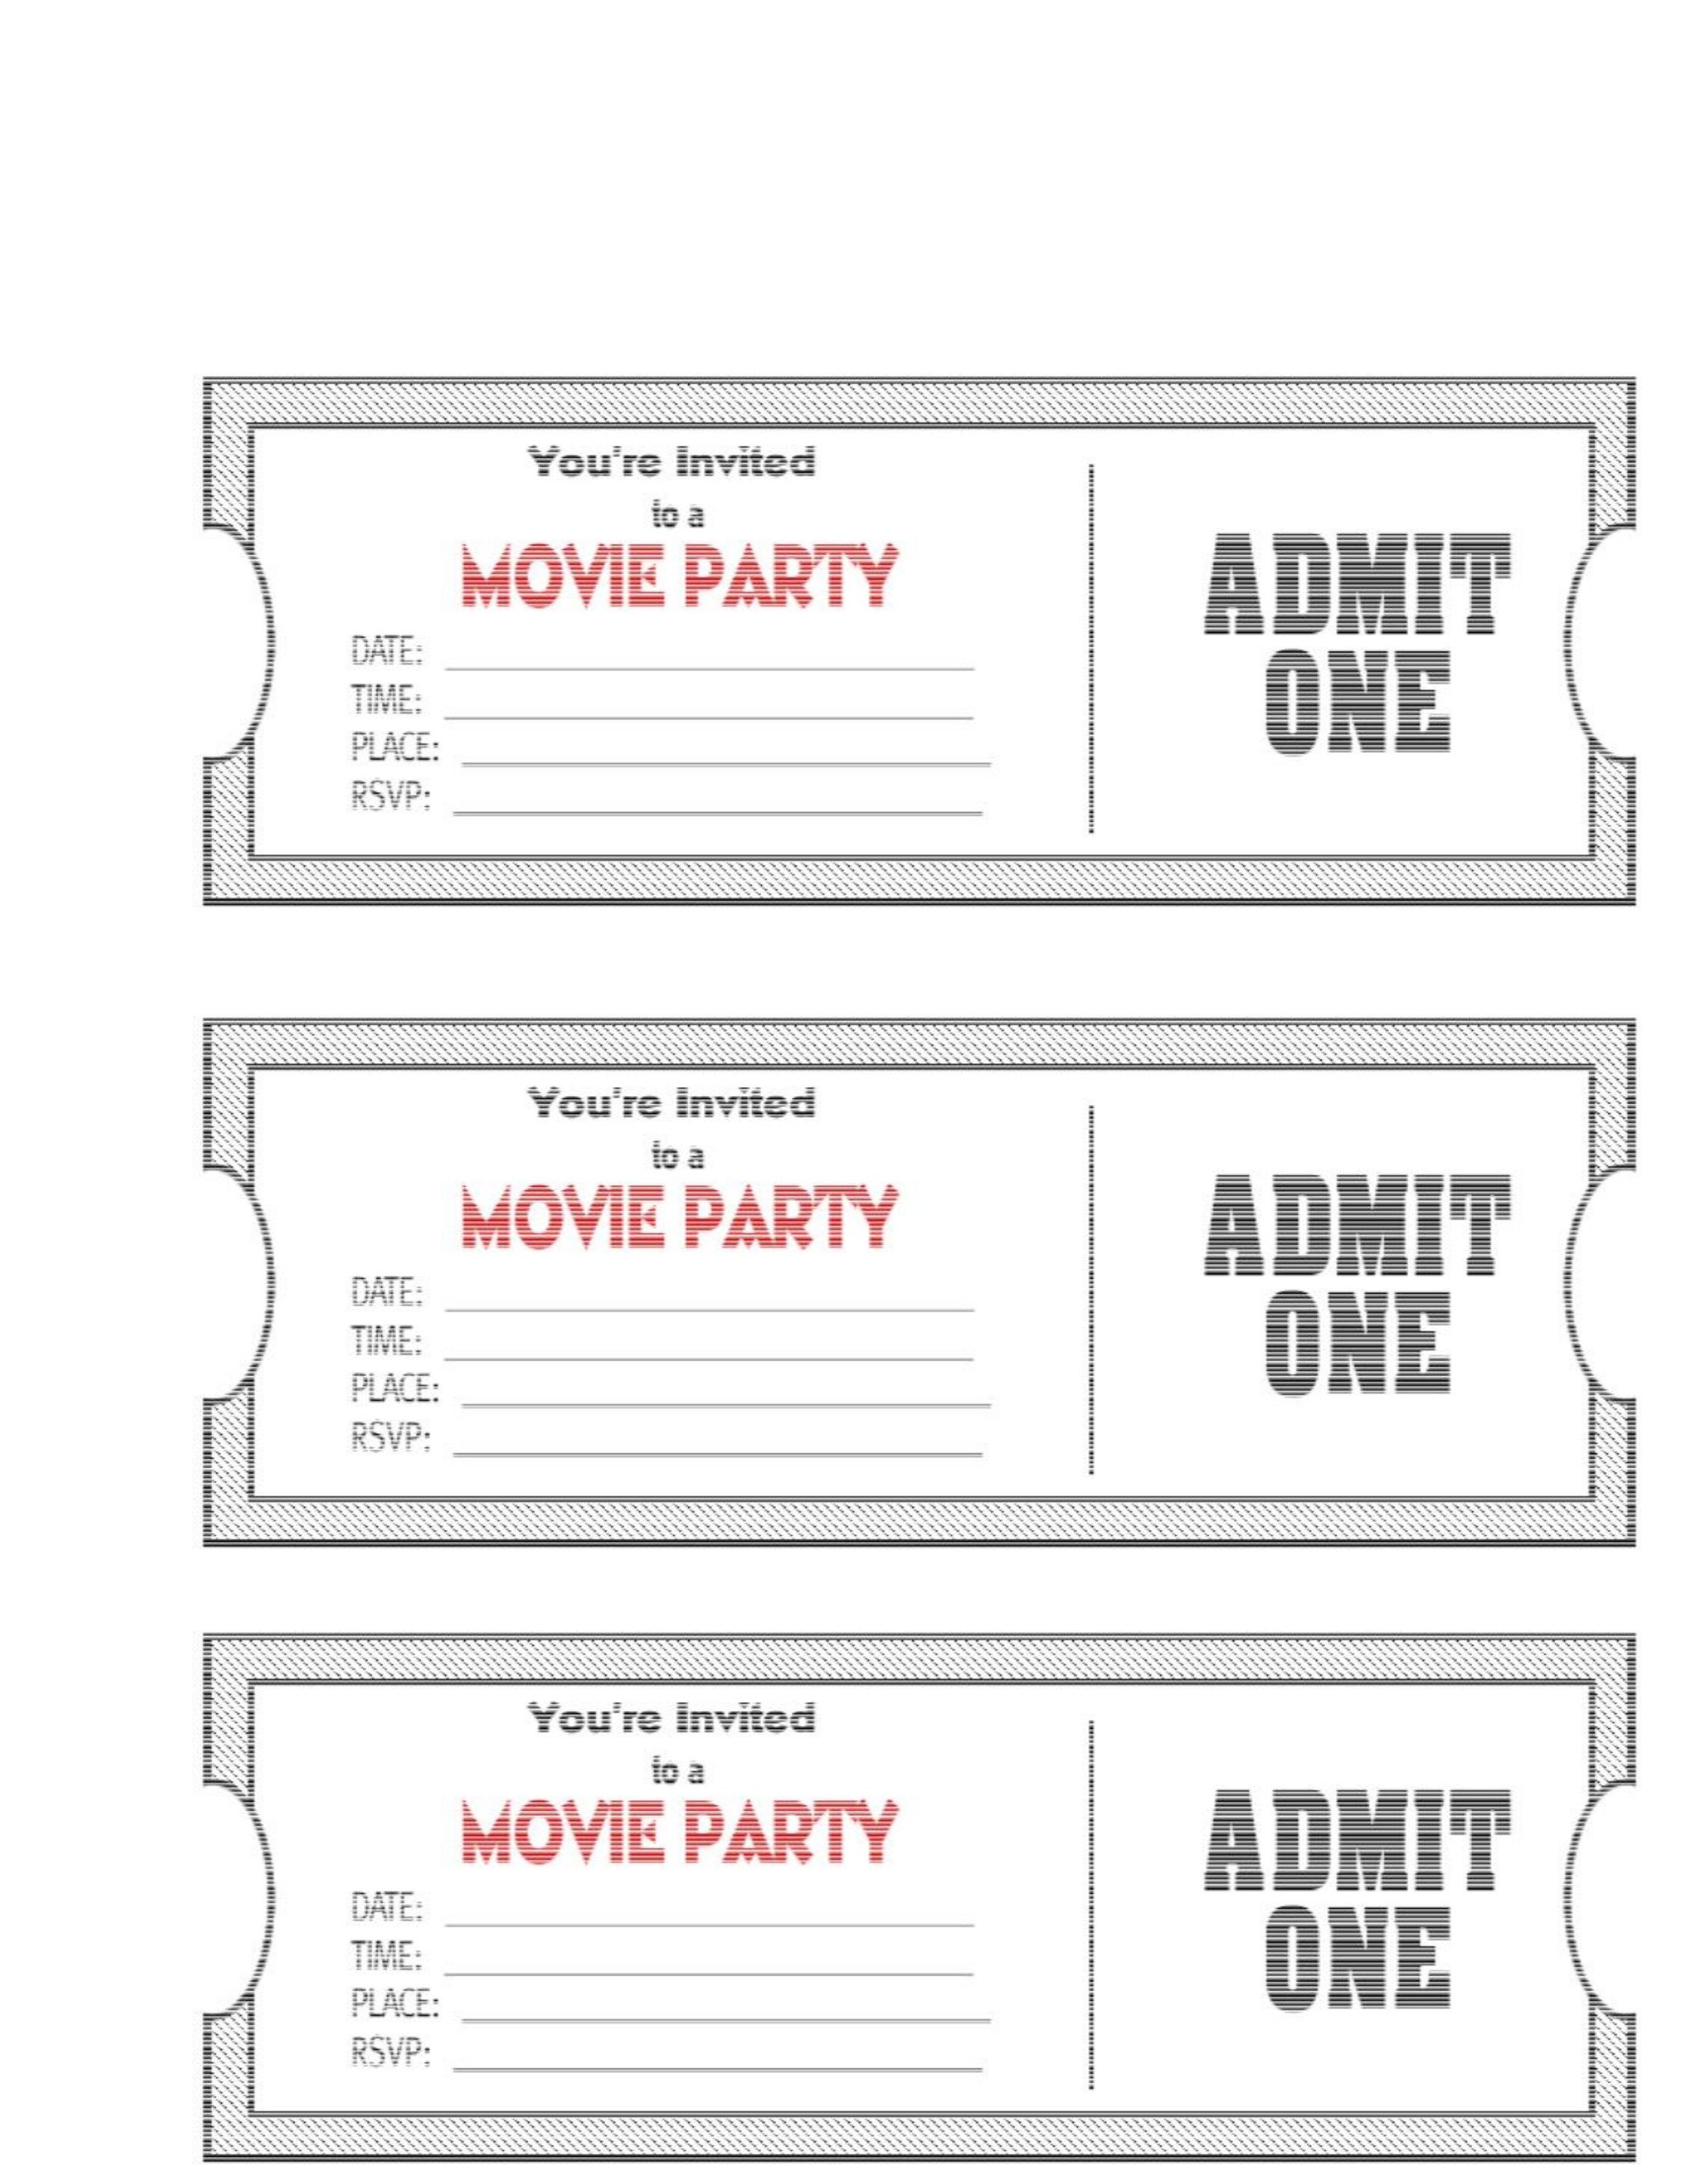 Ticket printing template